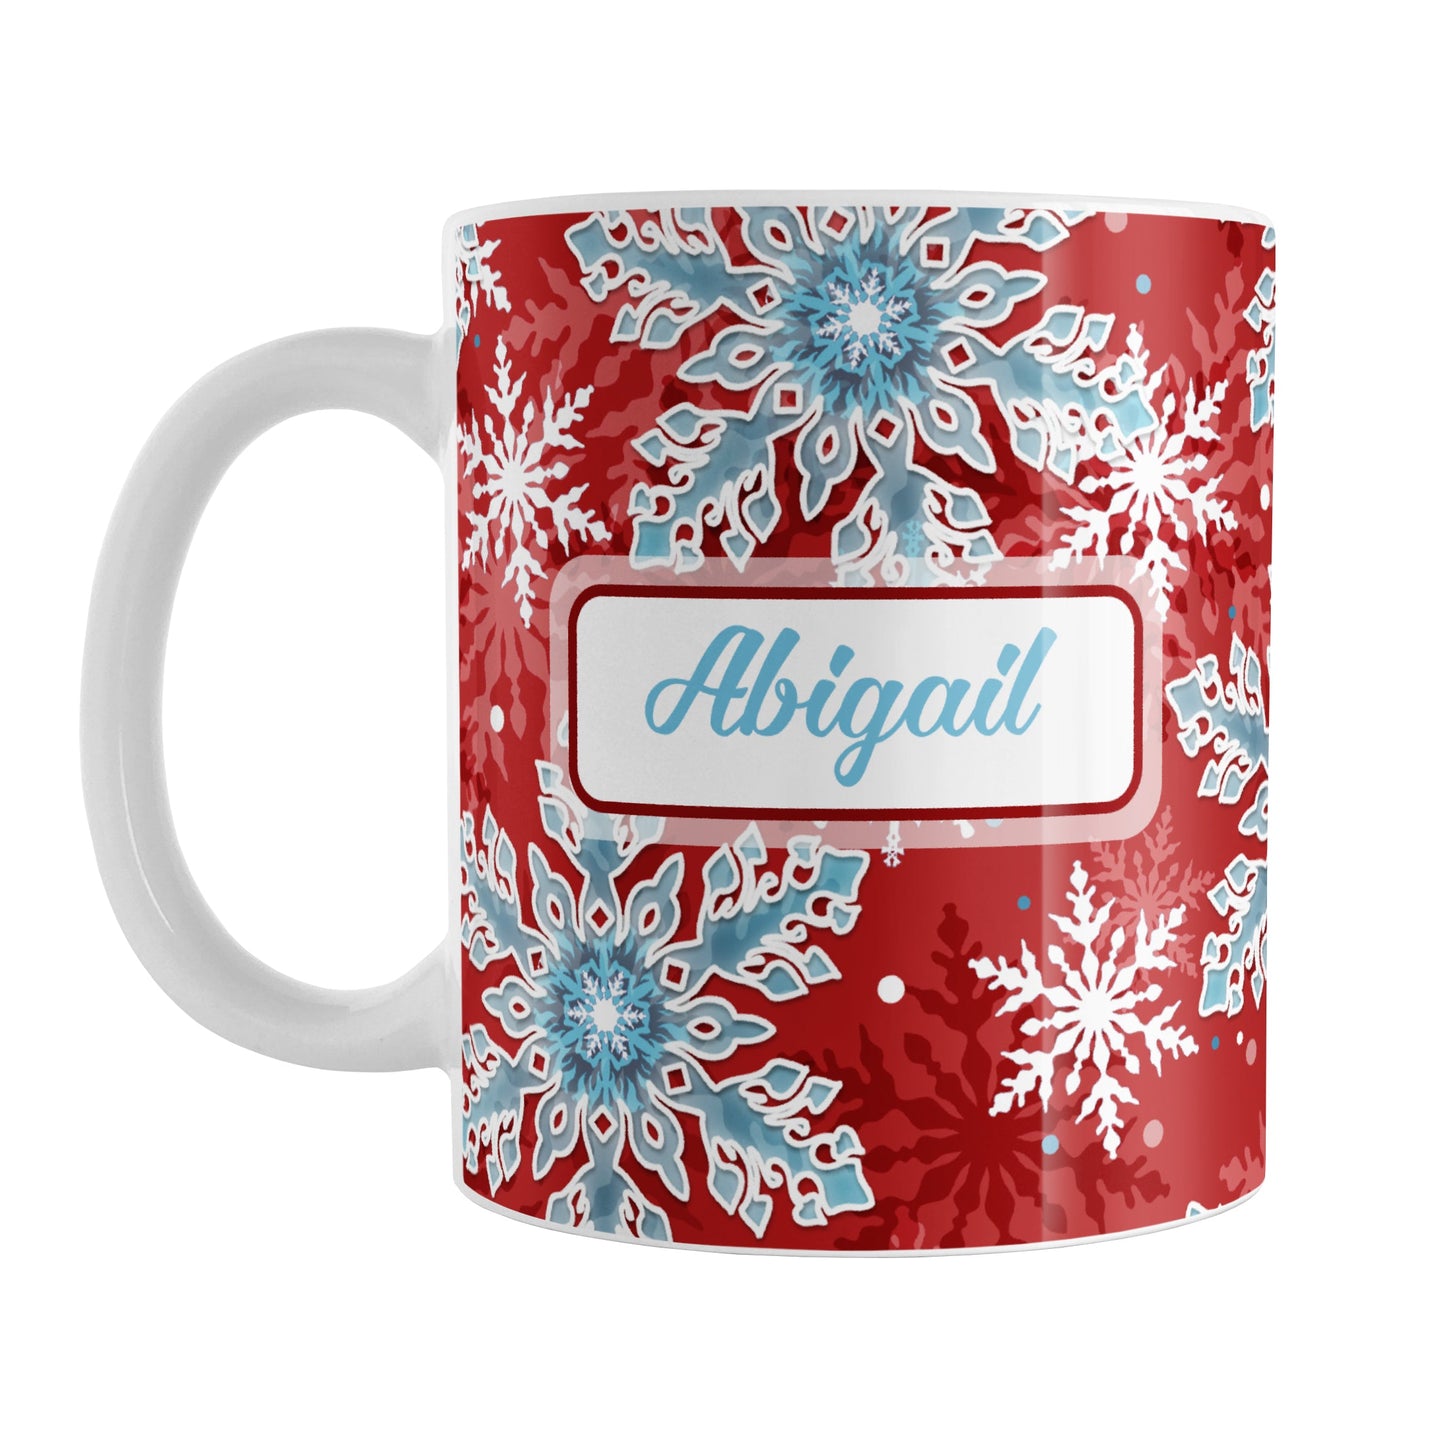 Personalized Red Blue Snowflake Winter Mug (11oz) at Amy's Coffee Mugs. A ceramic coffee mug designed with a pattern of aqua blue and white snowflakes over a red background color that wraps around the mug to the handle. Your name is custom printed in an aqua blue script font on both sides of the mug.